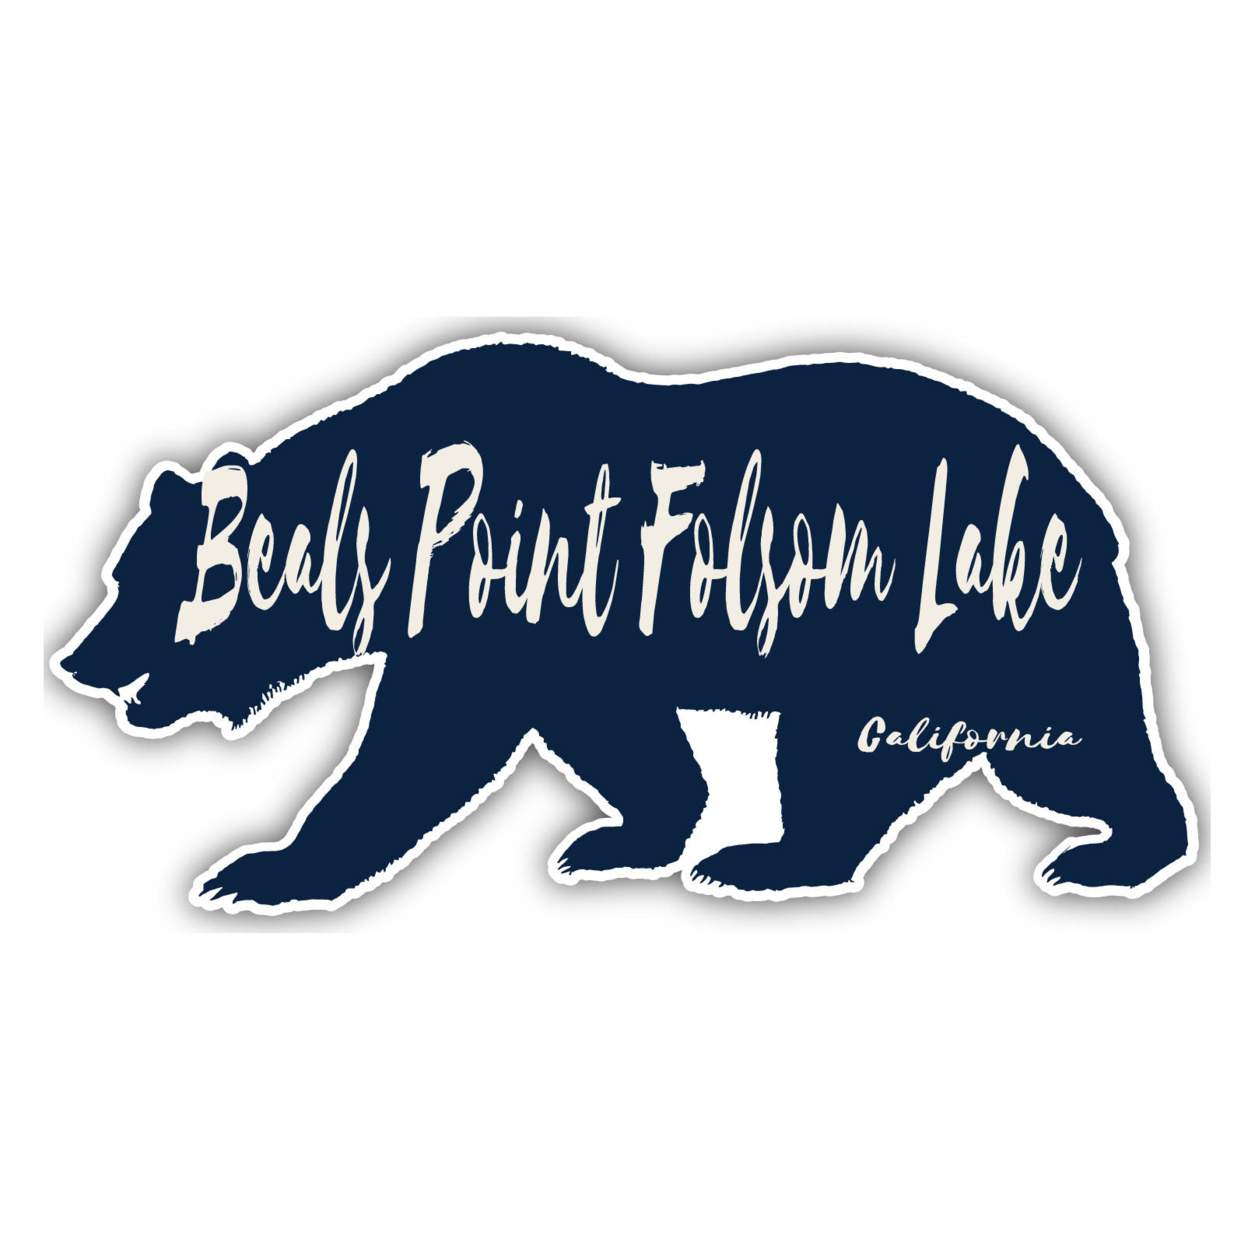 Beals Point Folsom Lake California Souvenir Decorative Stickers (Choose Theme And Size) - 4-Pack, 4-Inch, Tent